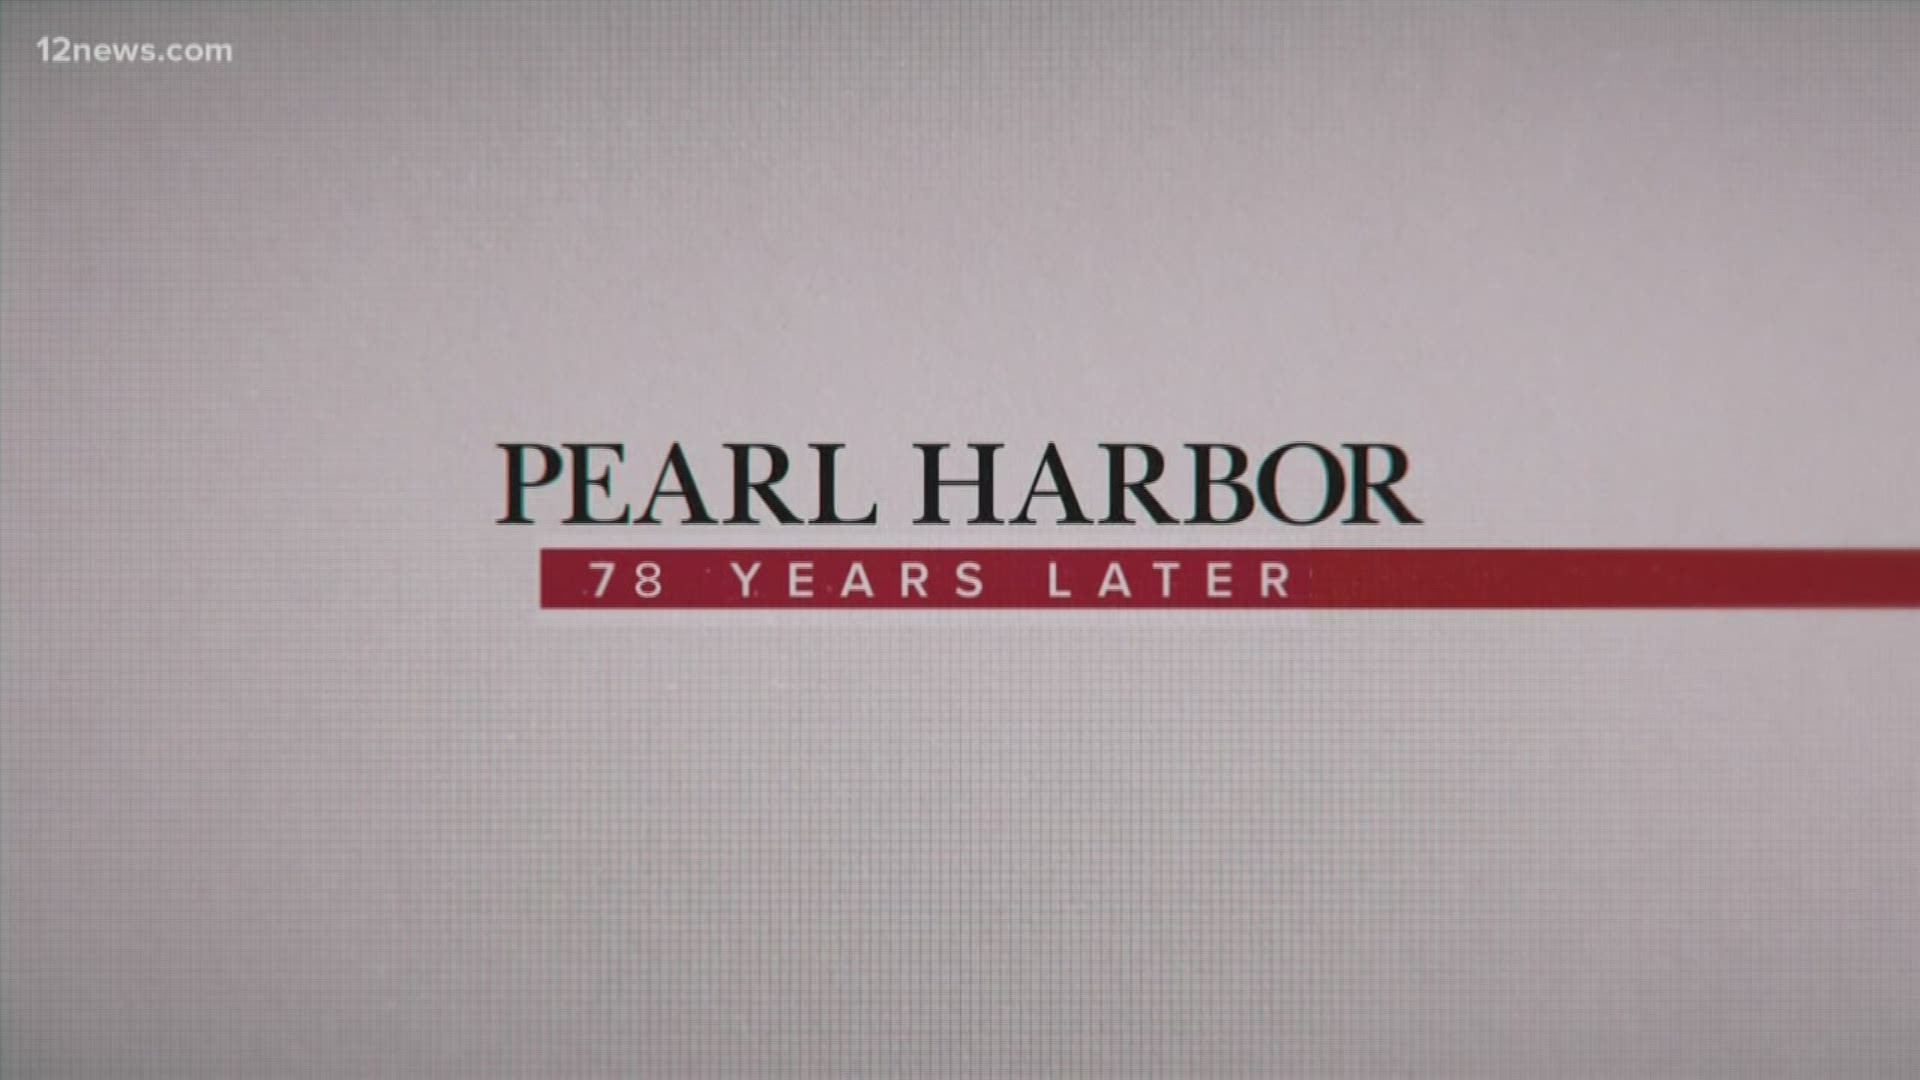 It's been 78 years since the attack on Pearl Harbor.